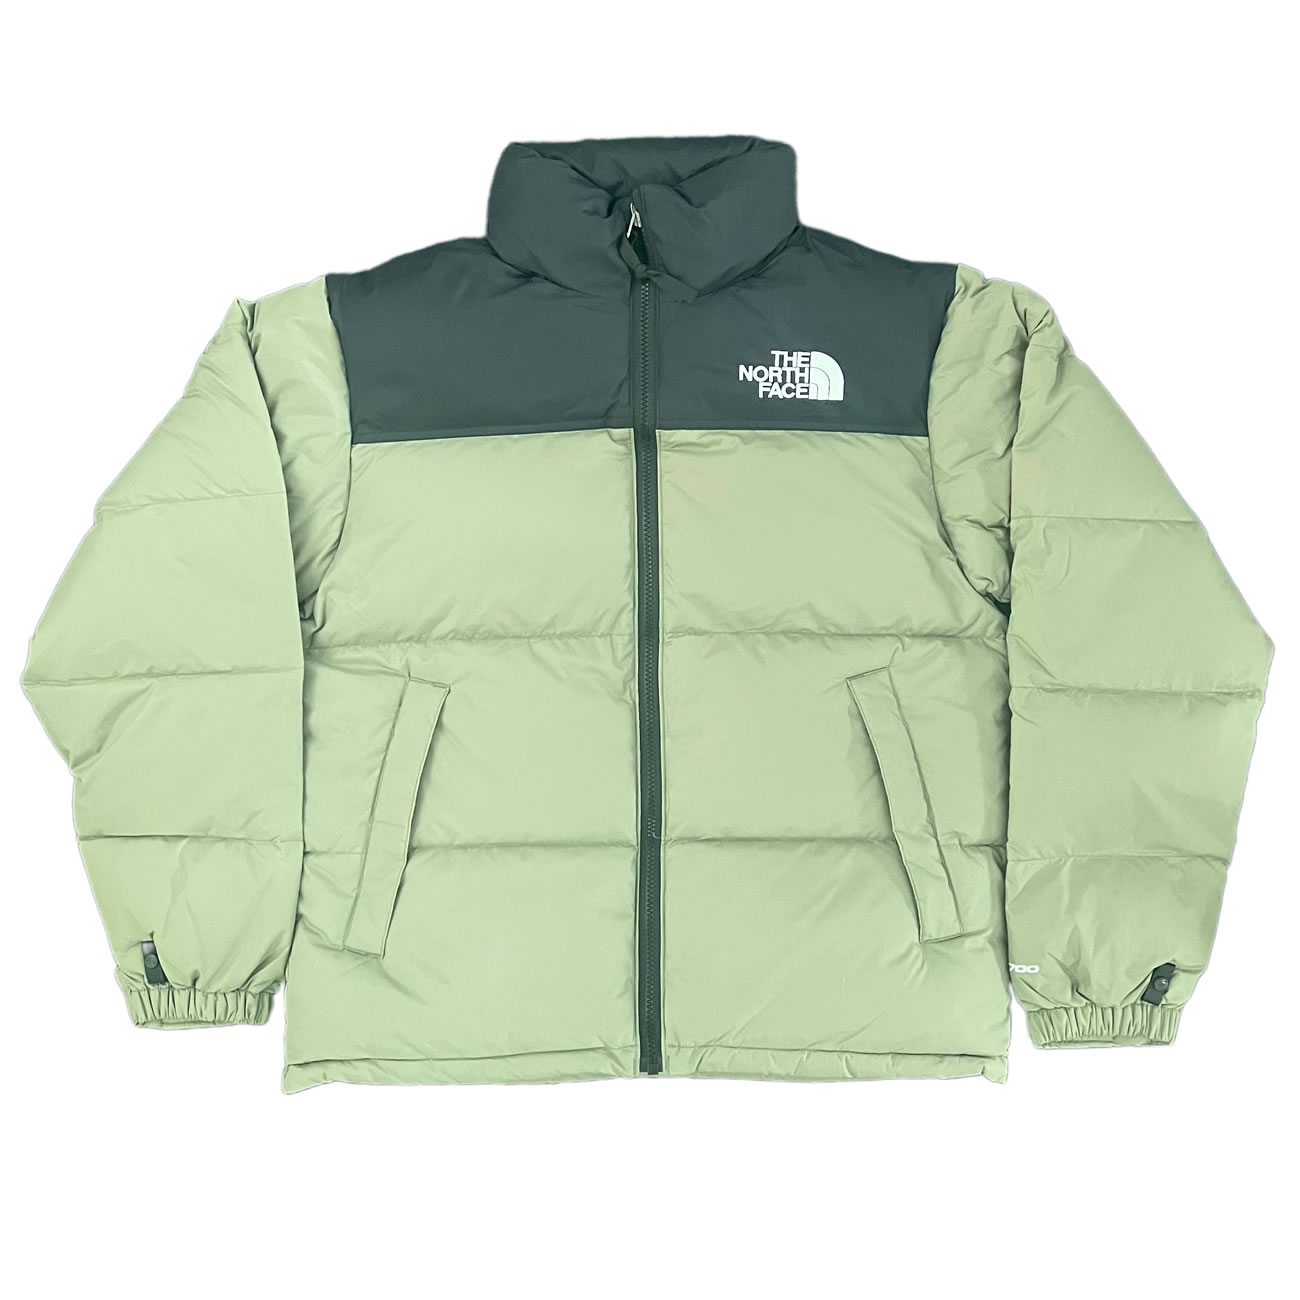 The North Face 1996 Retro Nuptse Packable Jacket Fw21 (2) - newkick.org